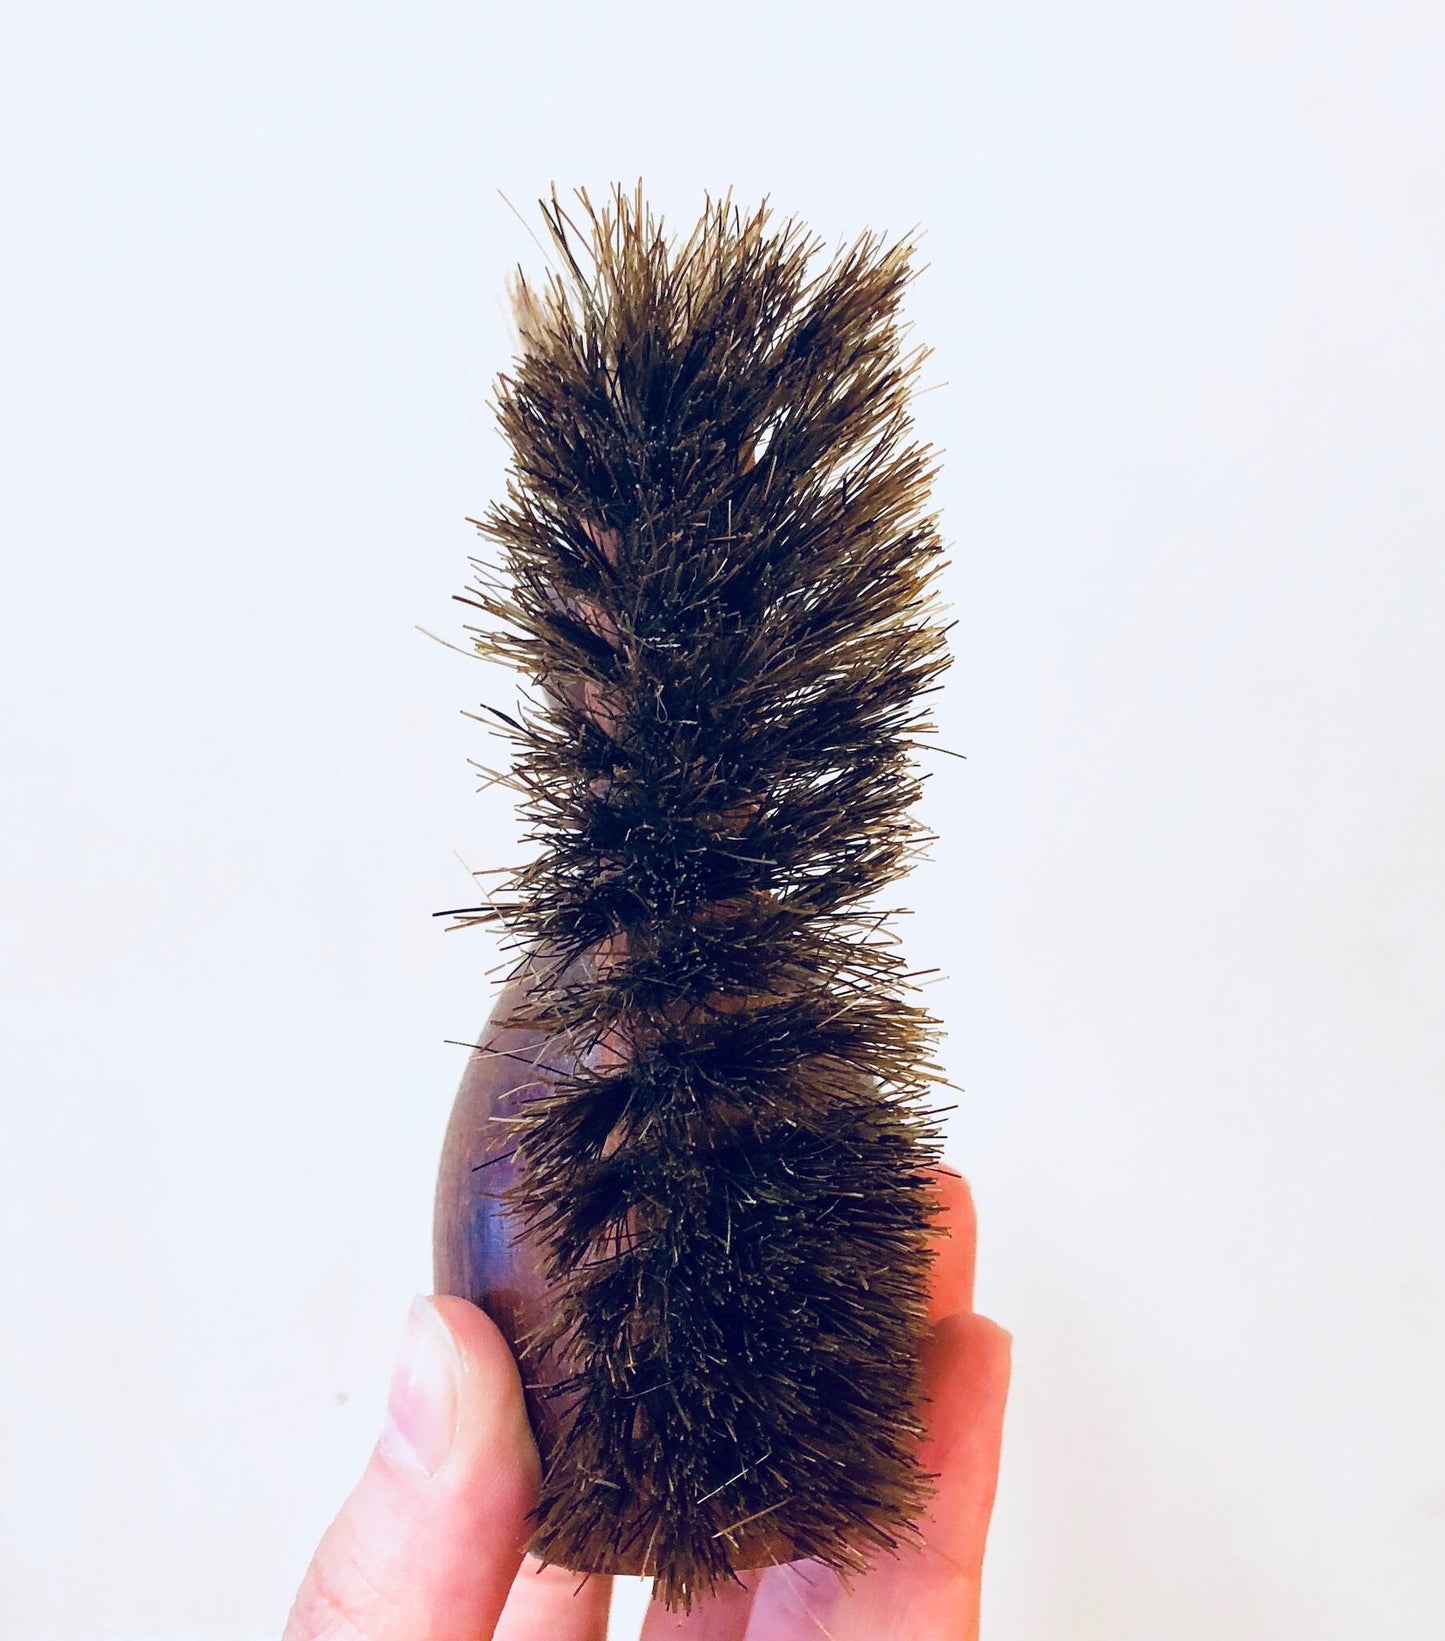 Vintage wooden scrub brush with natural bristles resembling a squirrel's tail, suitable for rustic home decor